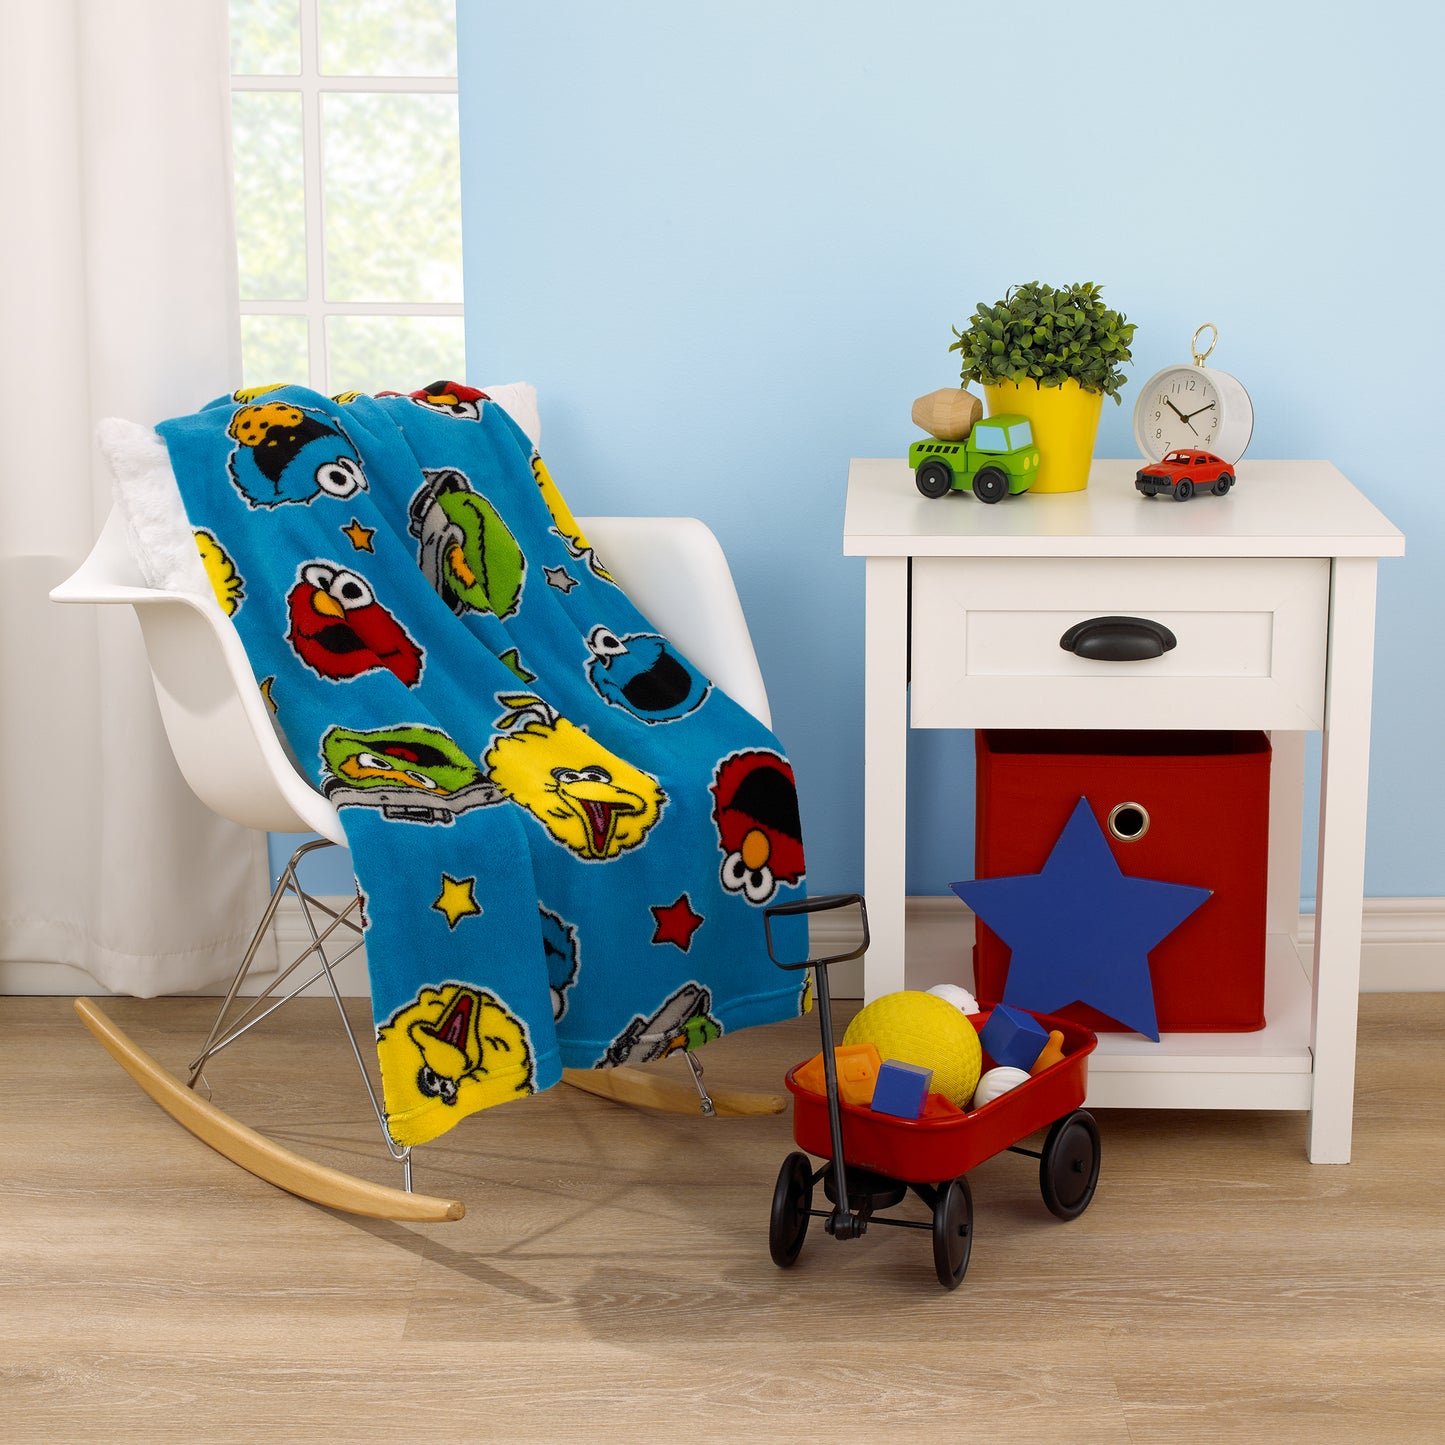 Sesame Street Come and Play Blue, Green, Red and Yellow, Elmo, Big Bird, Cookie Monster, and Oscar the Grouch Toddler Blanket